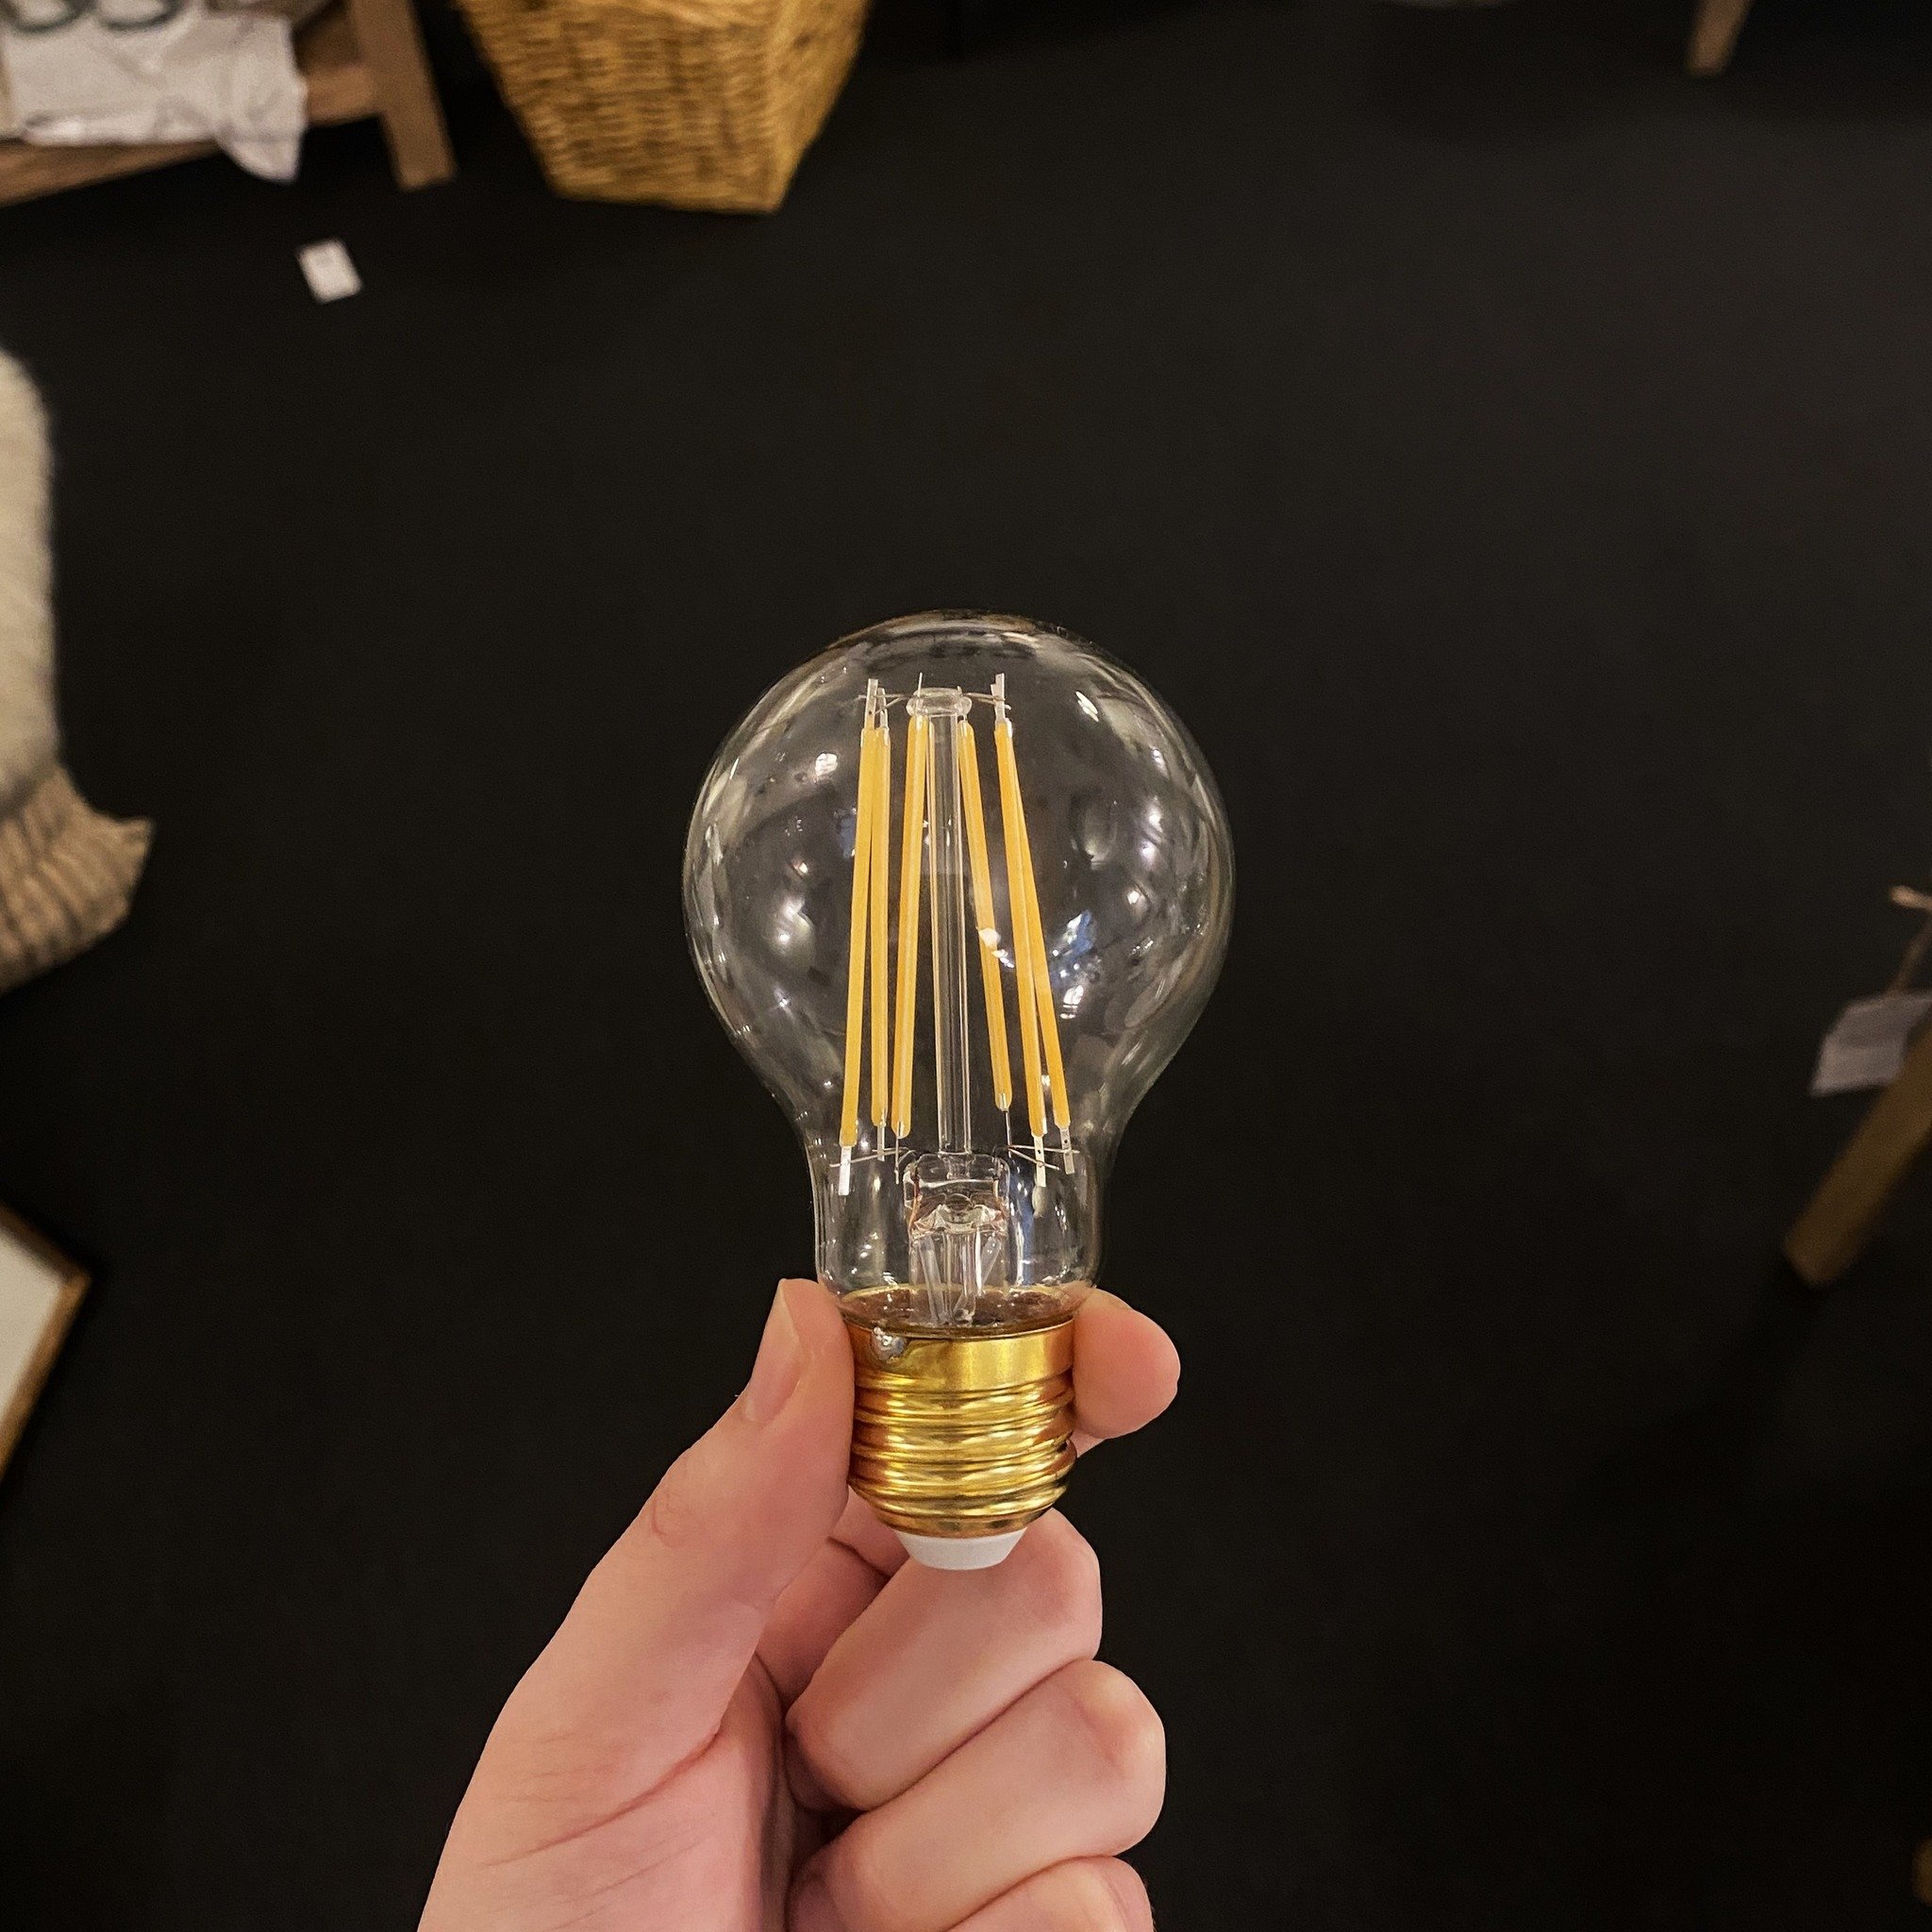 When did you last change your lightbulbs? 💡
.
.
Just like everything, lightbulbs don't last forever, towards the end of their life they will start to fade or flicker, decreasing the quality of the light in your home. 
Typically lightbulbs are bought